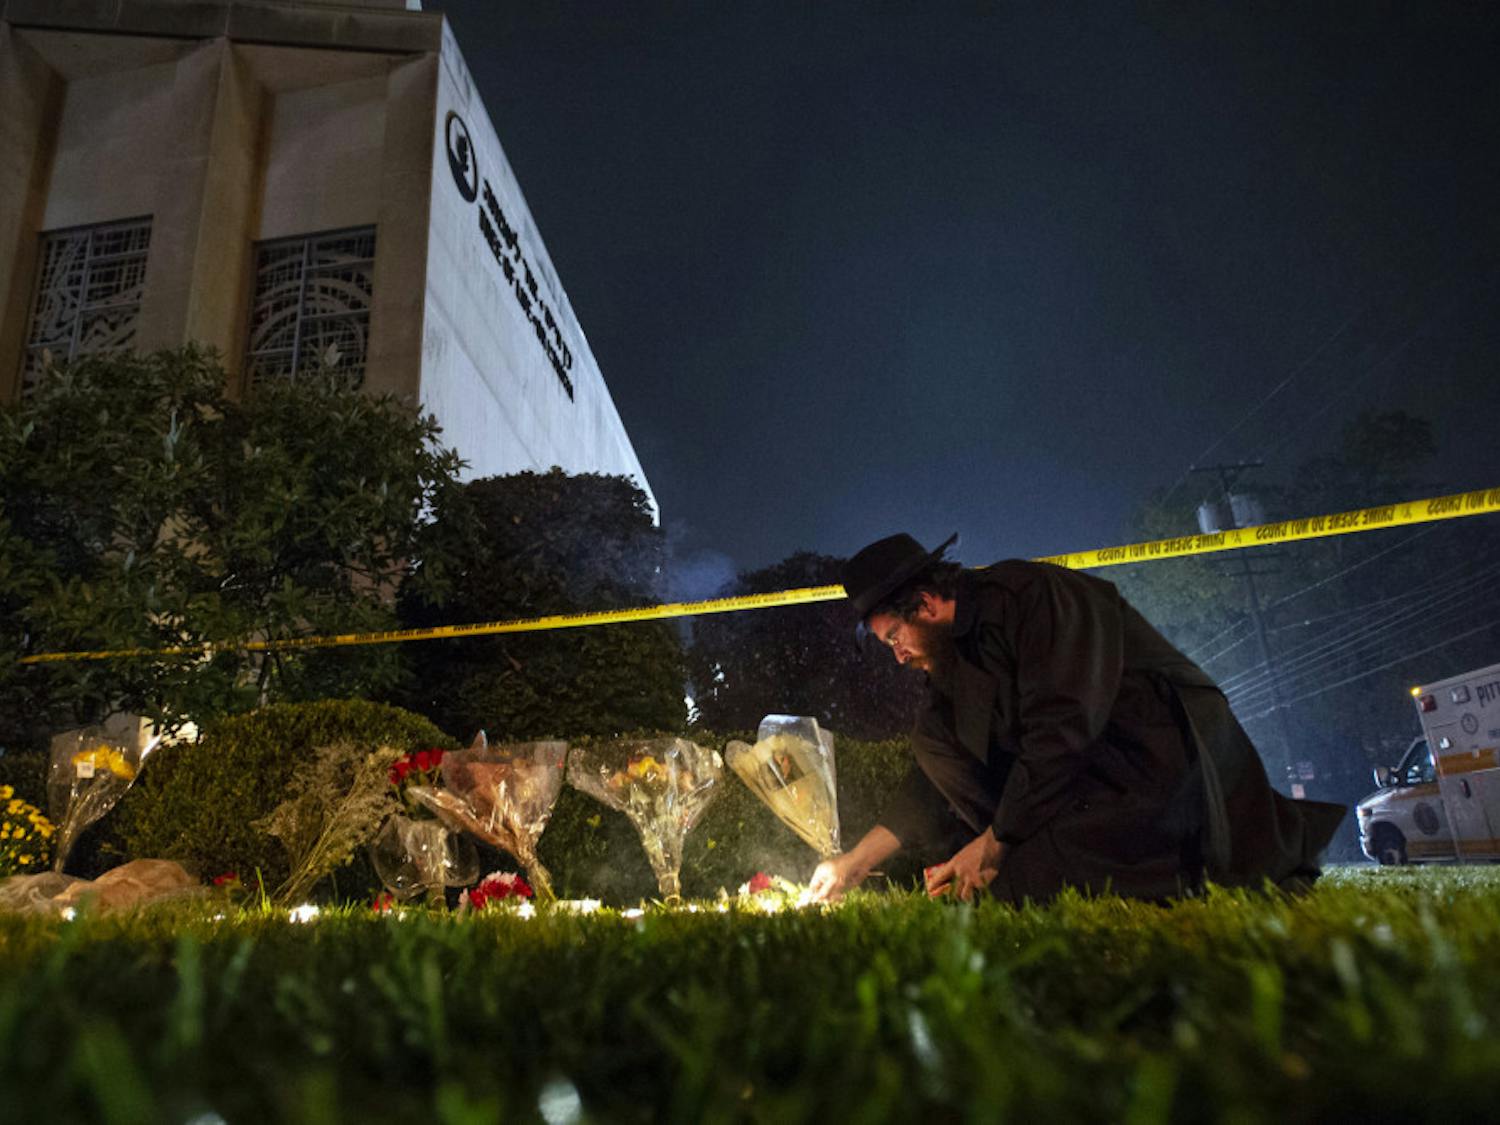 In this Oct. 27, 2018 photo, Rabbi Eli Wilansky lights a candle after a mass shooting at Tree of Life Synagogue in Pittsburgh's Squirrel Hill neighborhood. Robert Bowers, the suspect in Saturday's mass shooting, expressed hatred of Jews during the rampage and told officers afterward that Jews were committing genocide and he wanted them all to die, according to charging documents made public Sunday. (Steph Chambers/Pittsburgh Post-Gazette via AP)